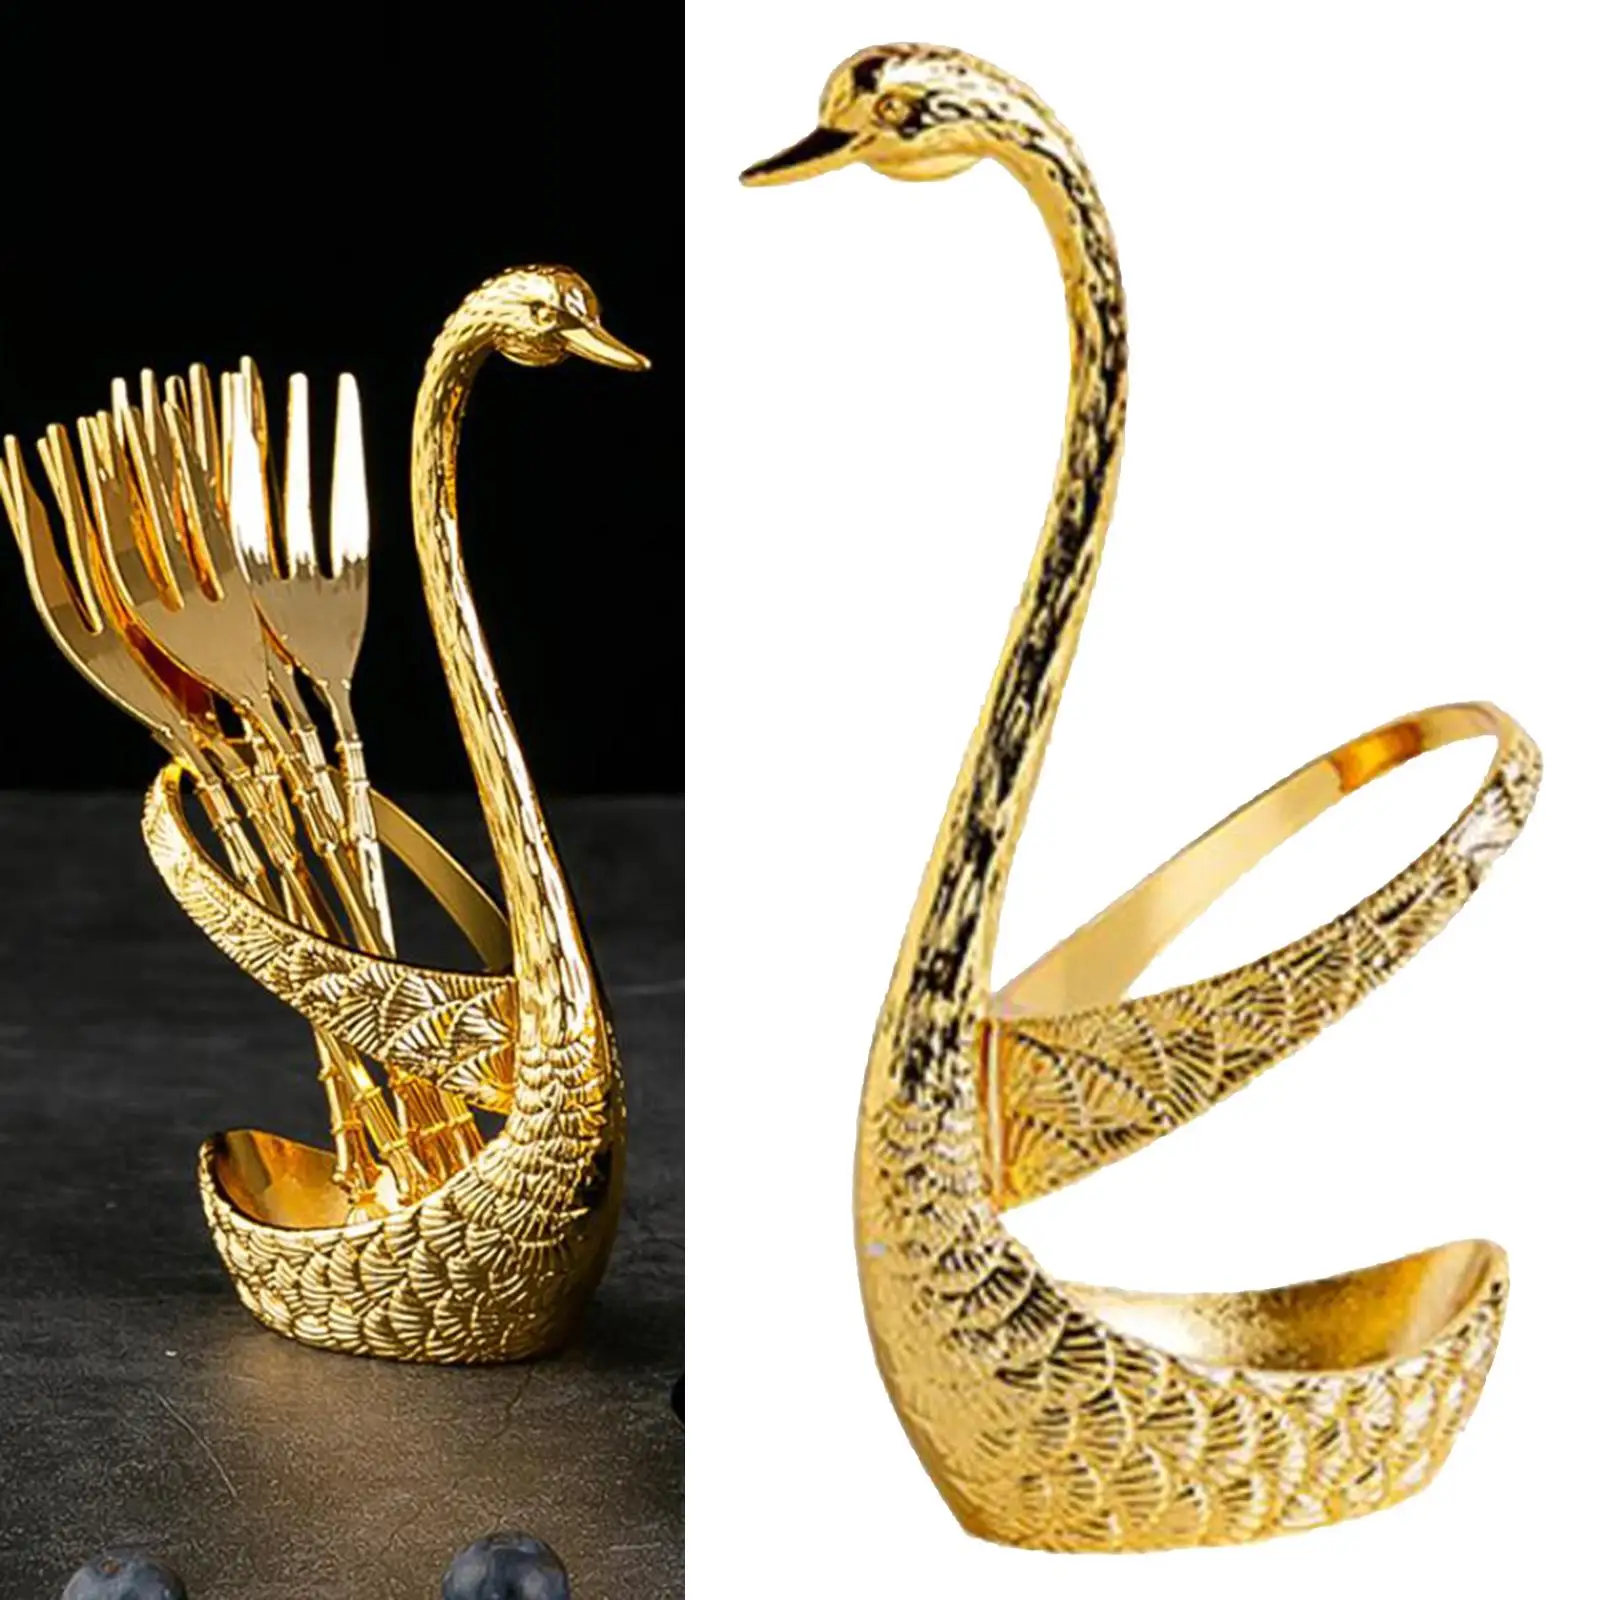 Swan Base Coffee Spoon Holder Stand Organizer for Home Use, Bar, Restaurant